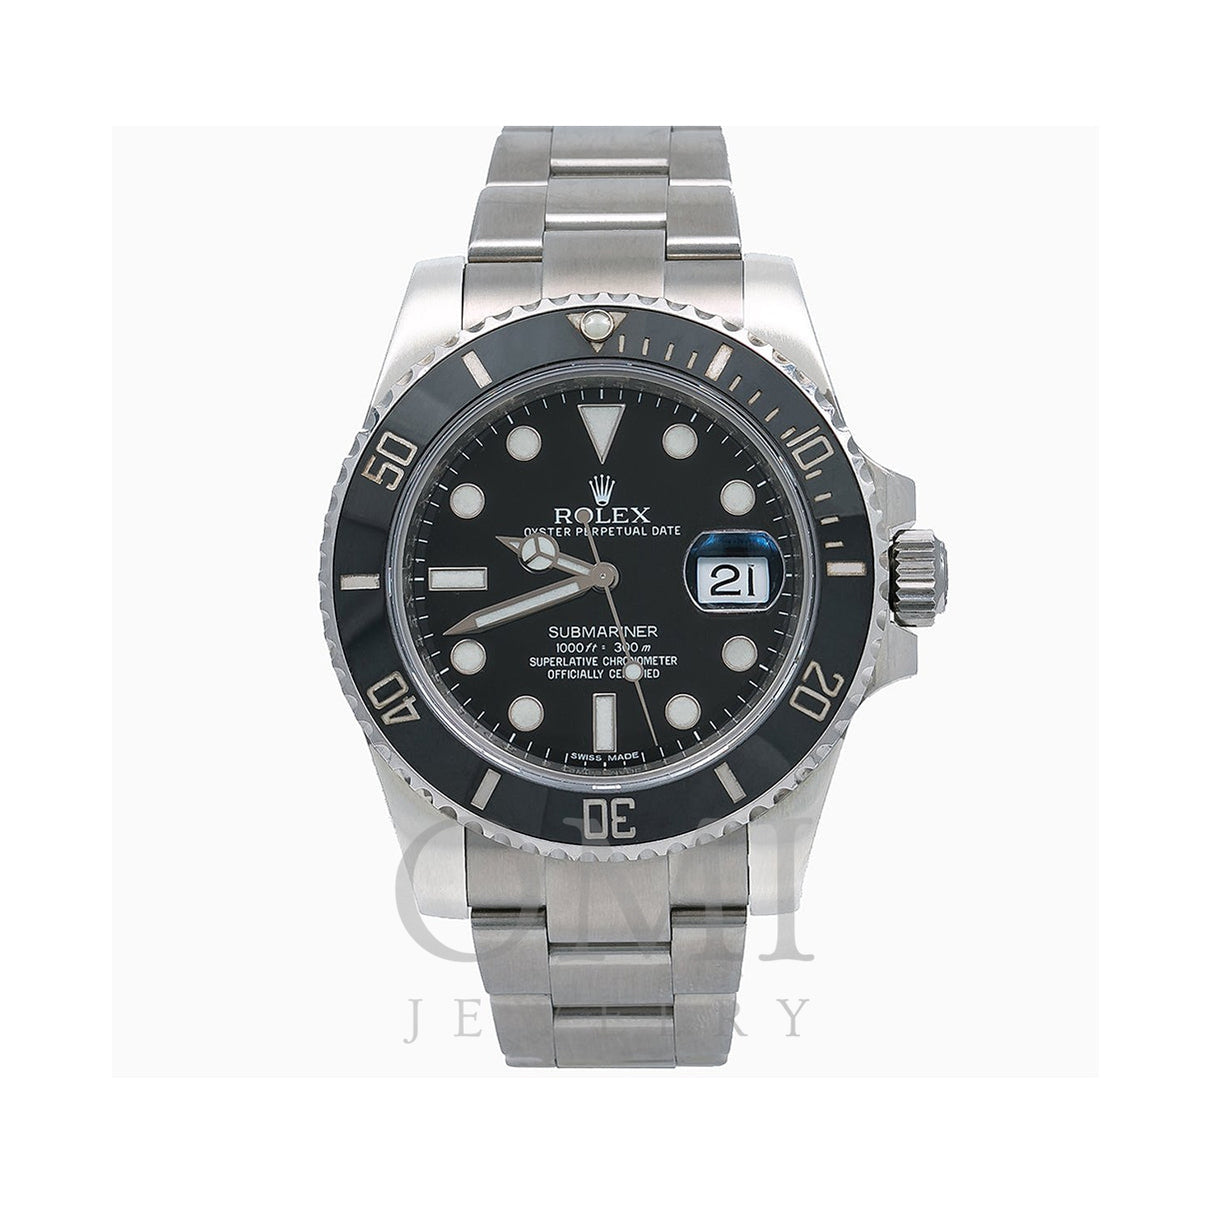 Submariner Date 116610LN Black Dial With Stainless Steel Br - OMI Jewelry